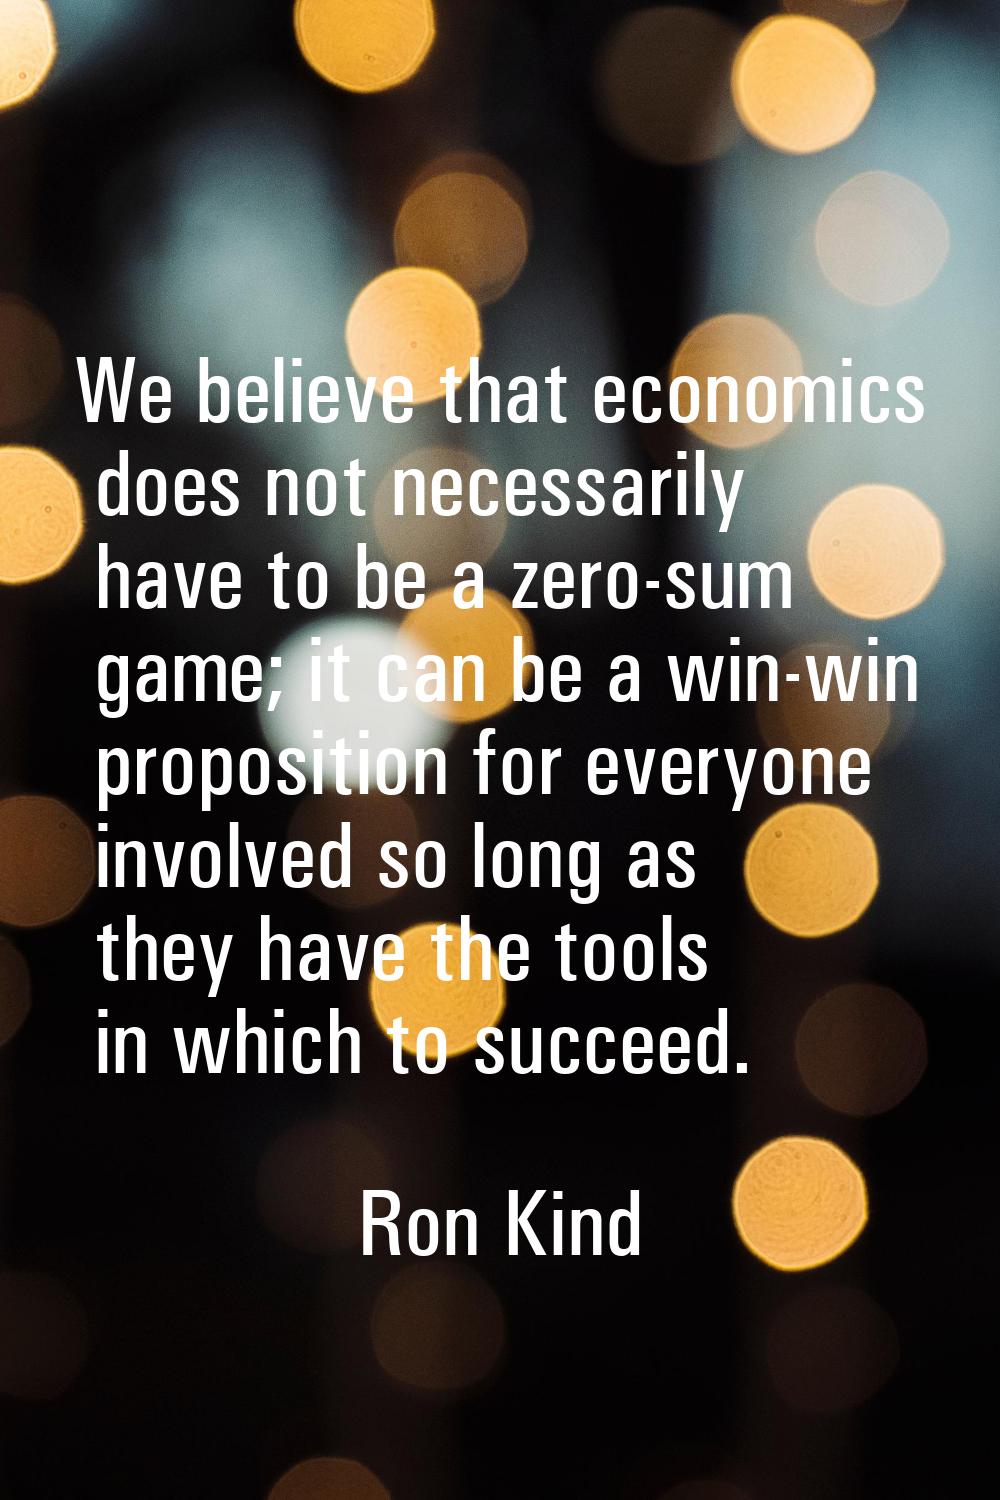 We believe that economics does not necessarily have to be a zero-sum game; it can be a win-win prop